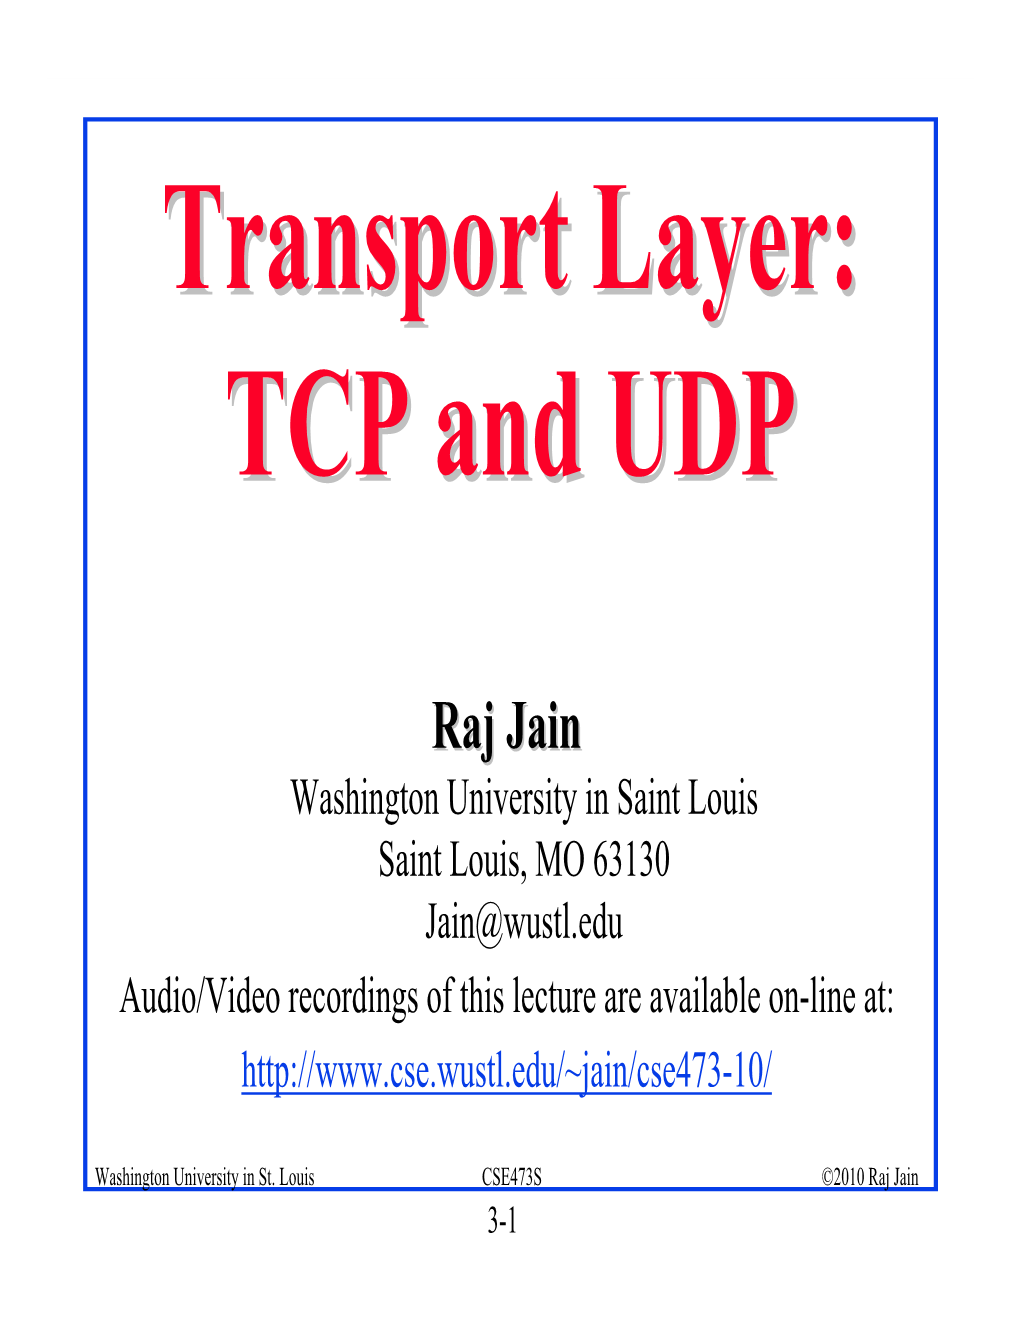 Internet Transport Layer: TCP And